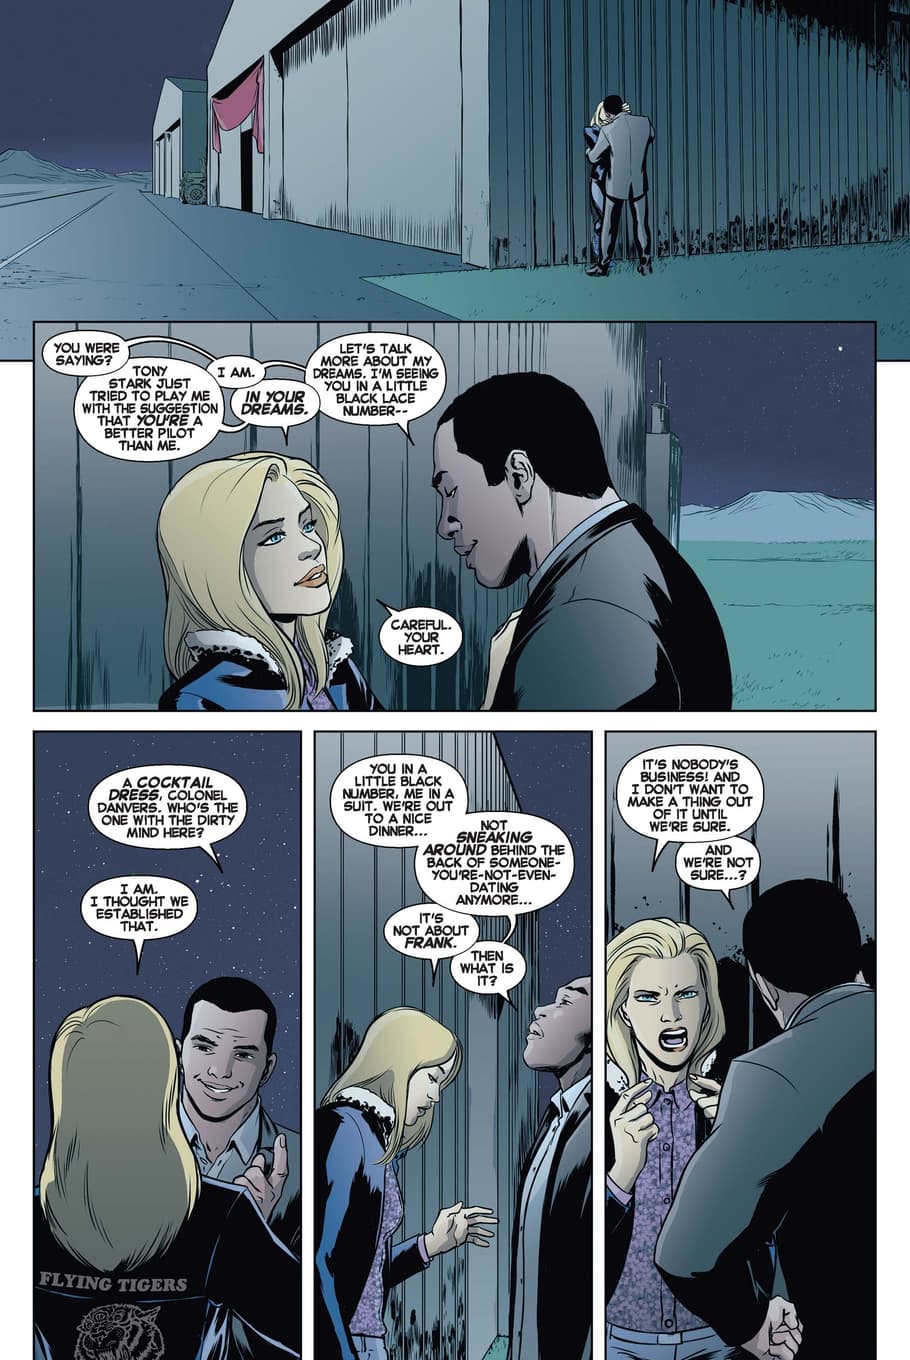 A love story begins in CAPTAIN MARVEL (2014) #1.